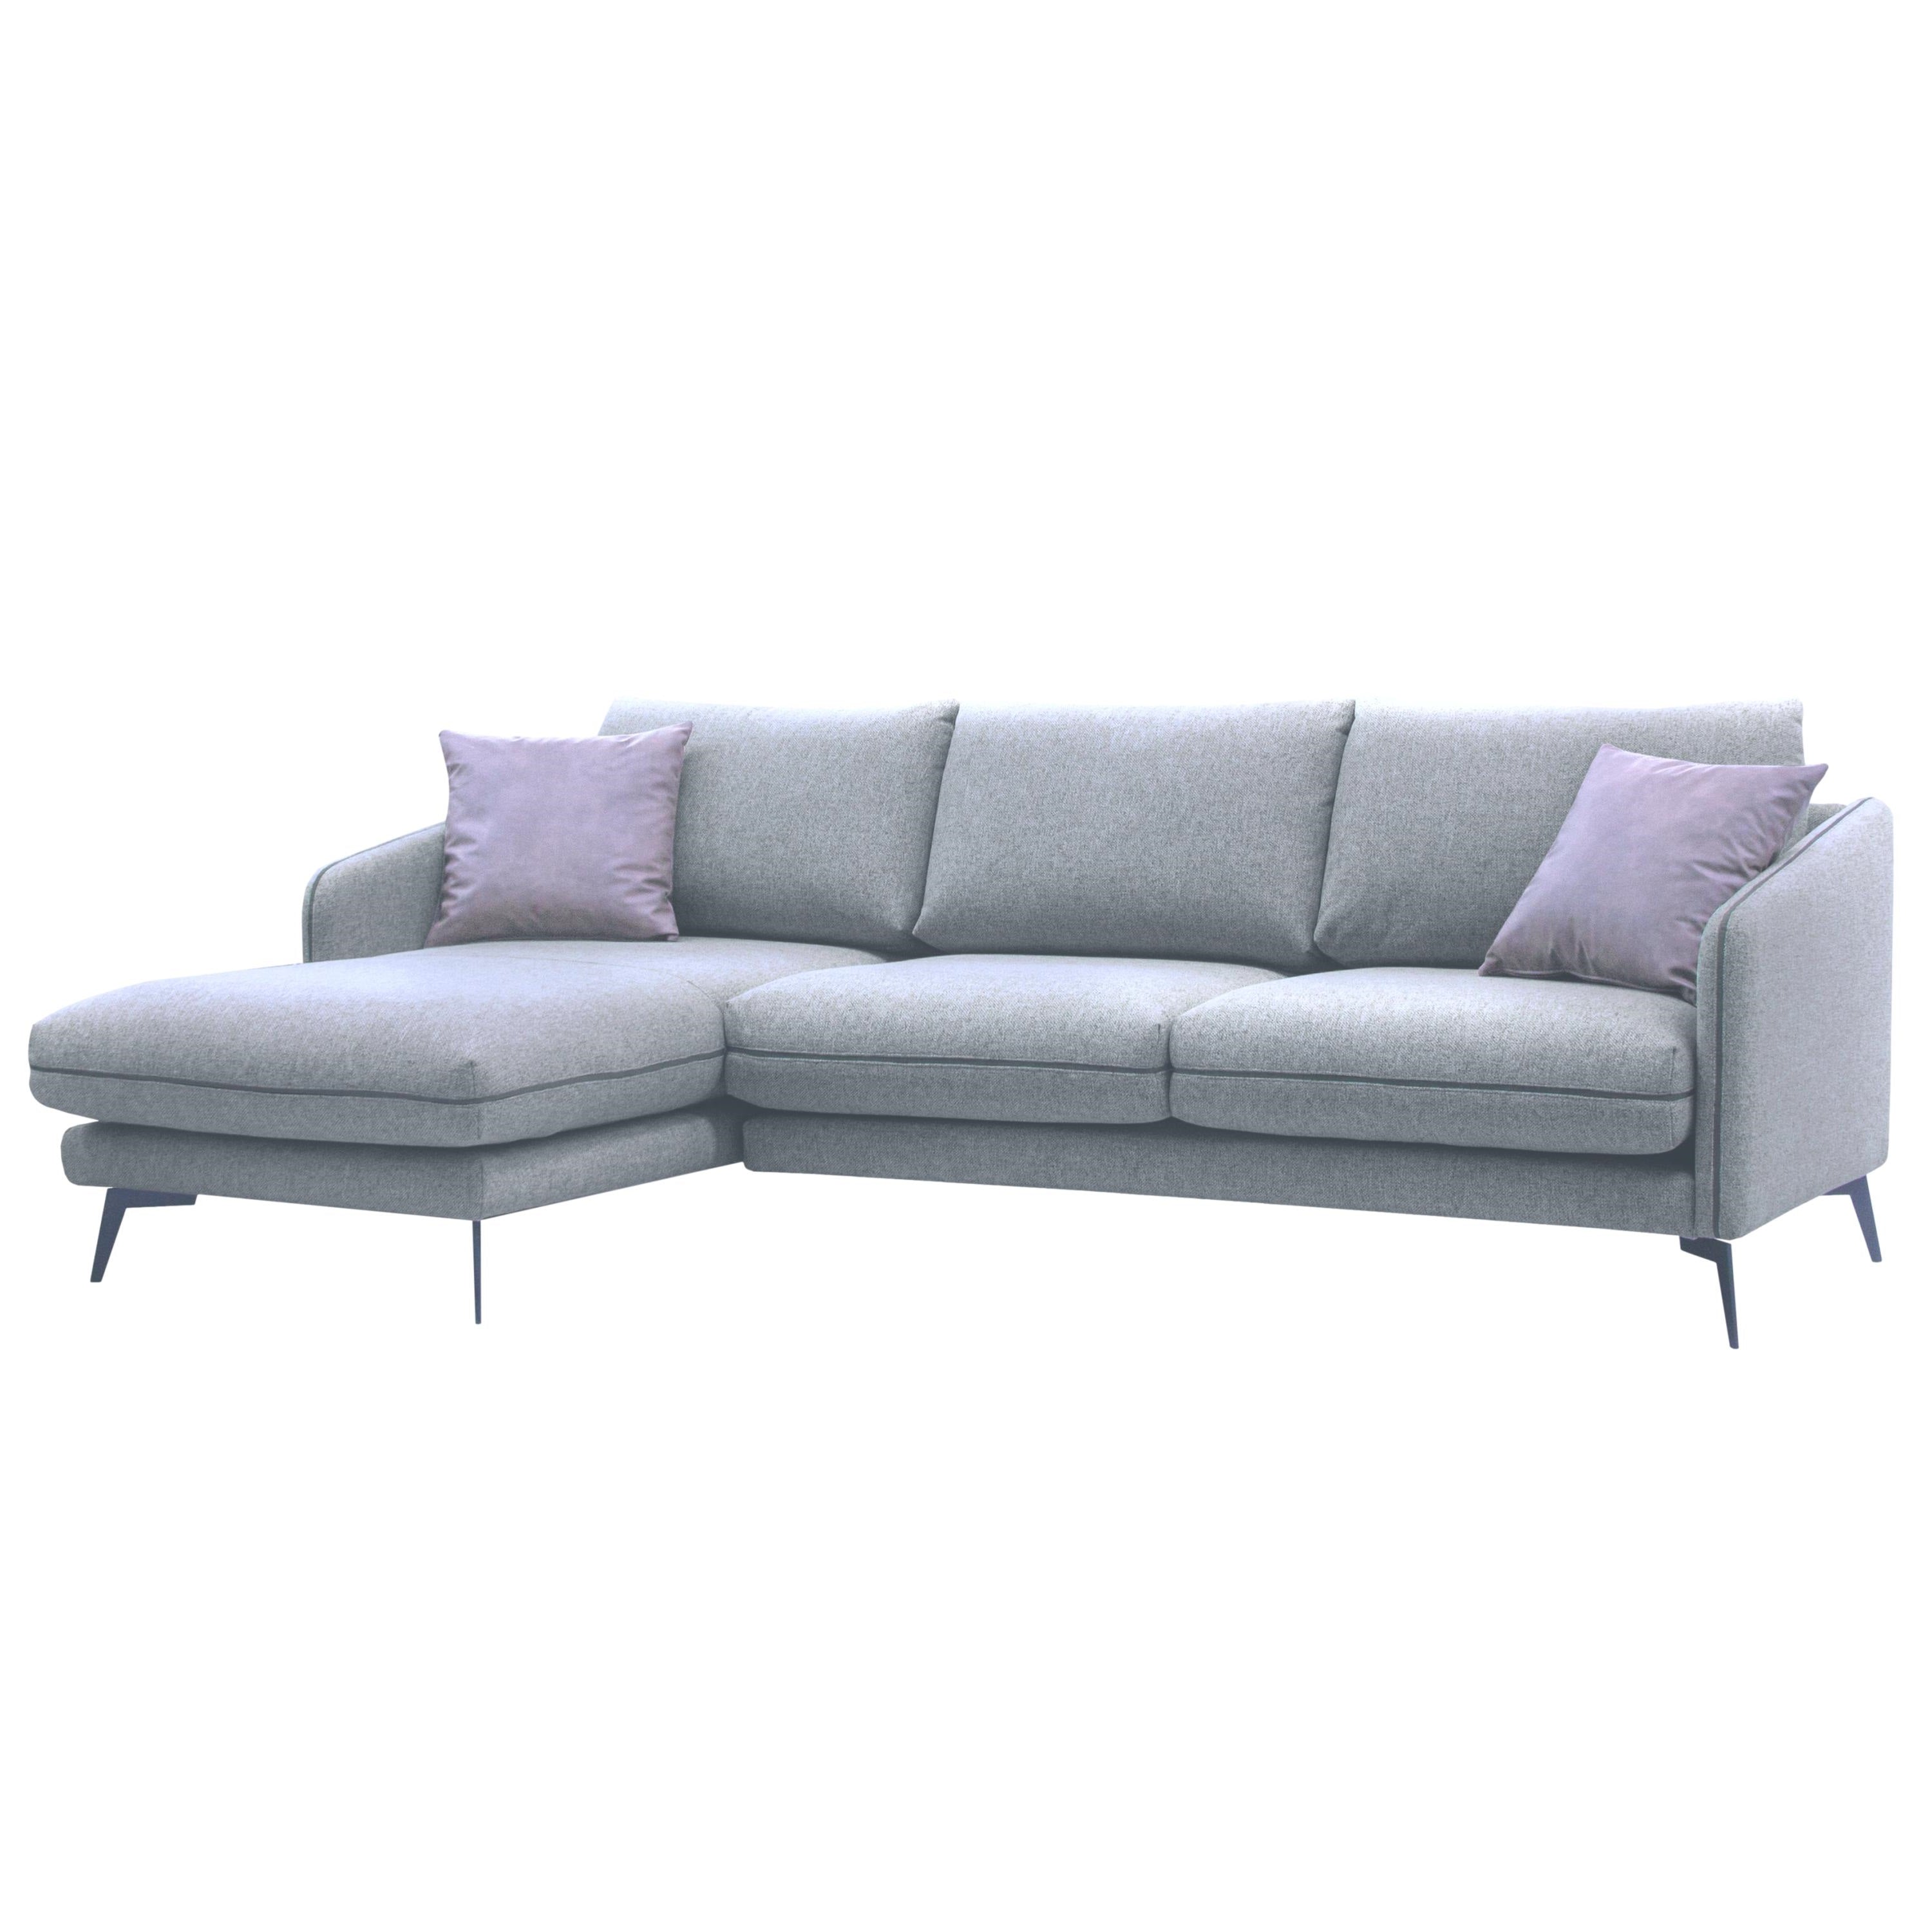 ViscoLogic NOEL Mid Century Sofa Chaise with High Resilience Foam and Sturdy Metal Legs (Left orientation)